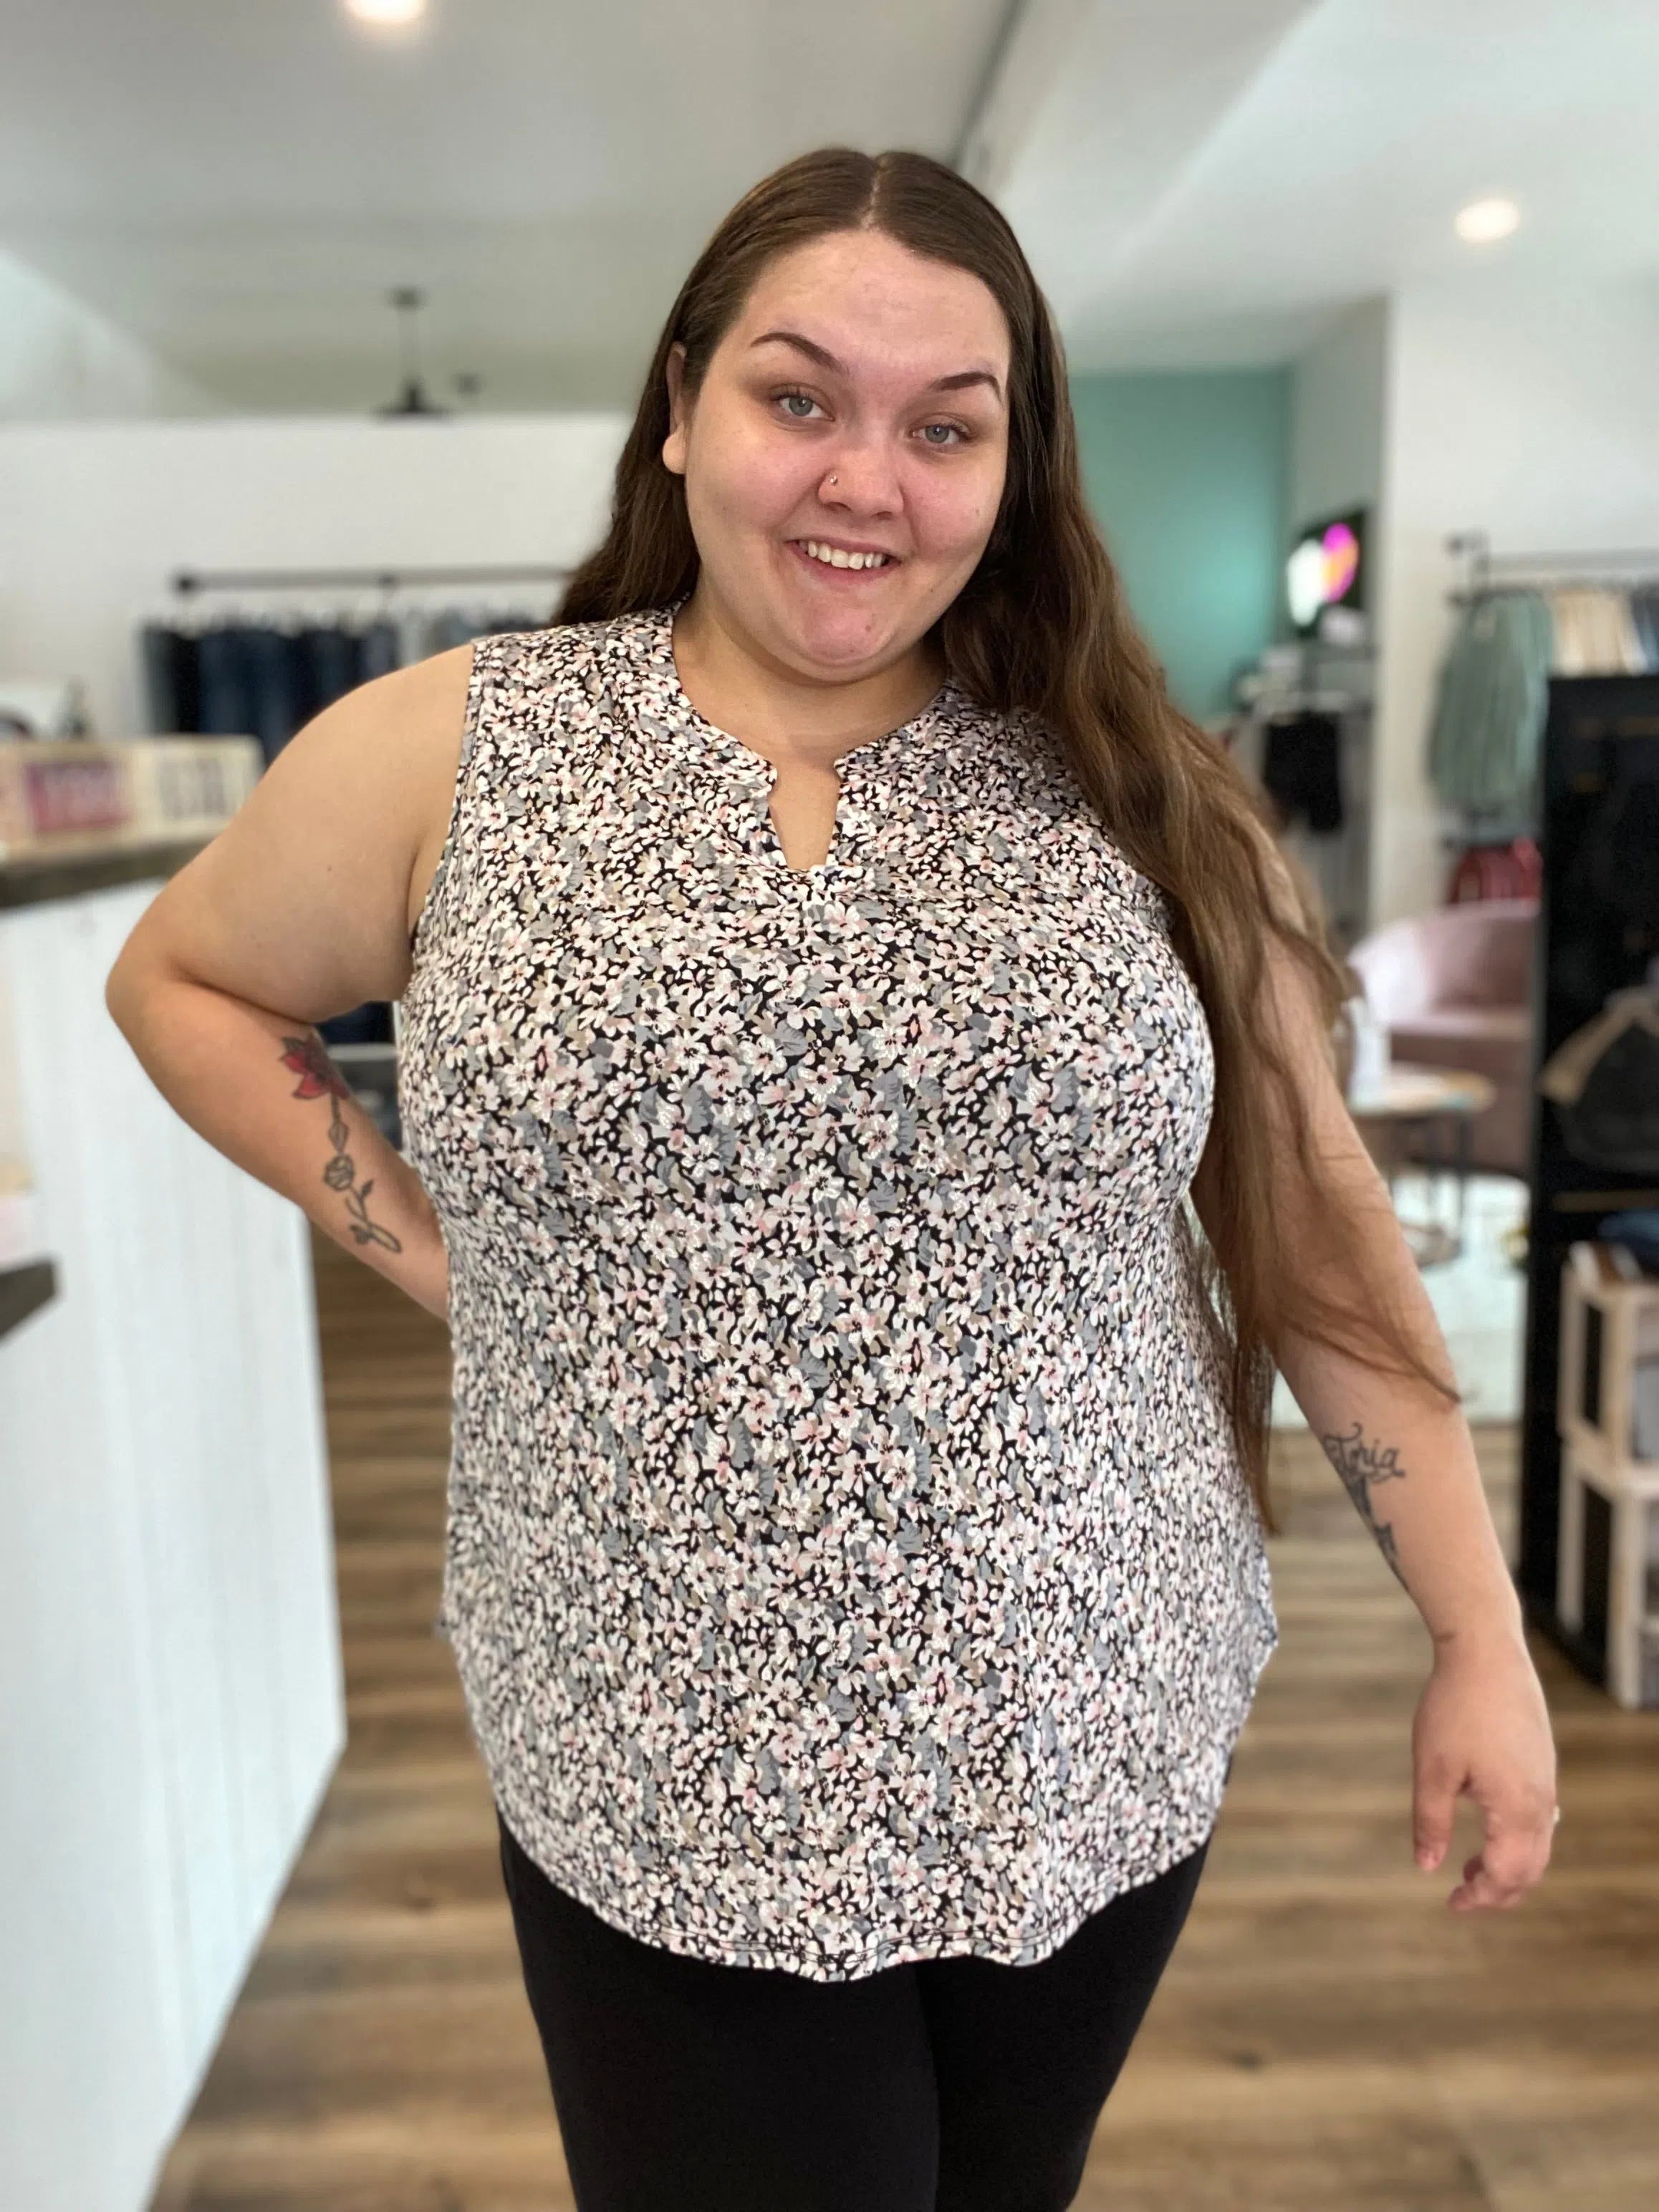 Shop Ansley Textured Floral Tank-Shirts & Tops at Ruby Joy Boutique, a Women's Clothing Store in Pickerington, Ohio